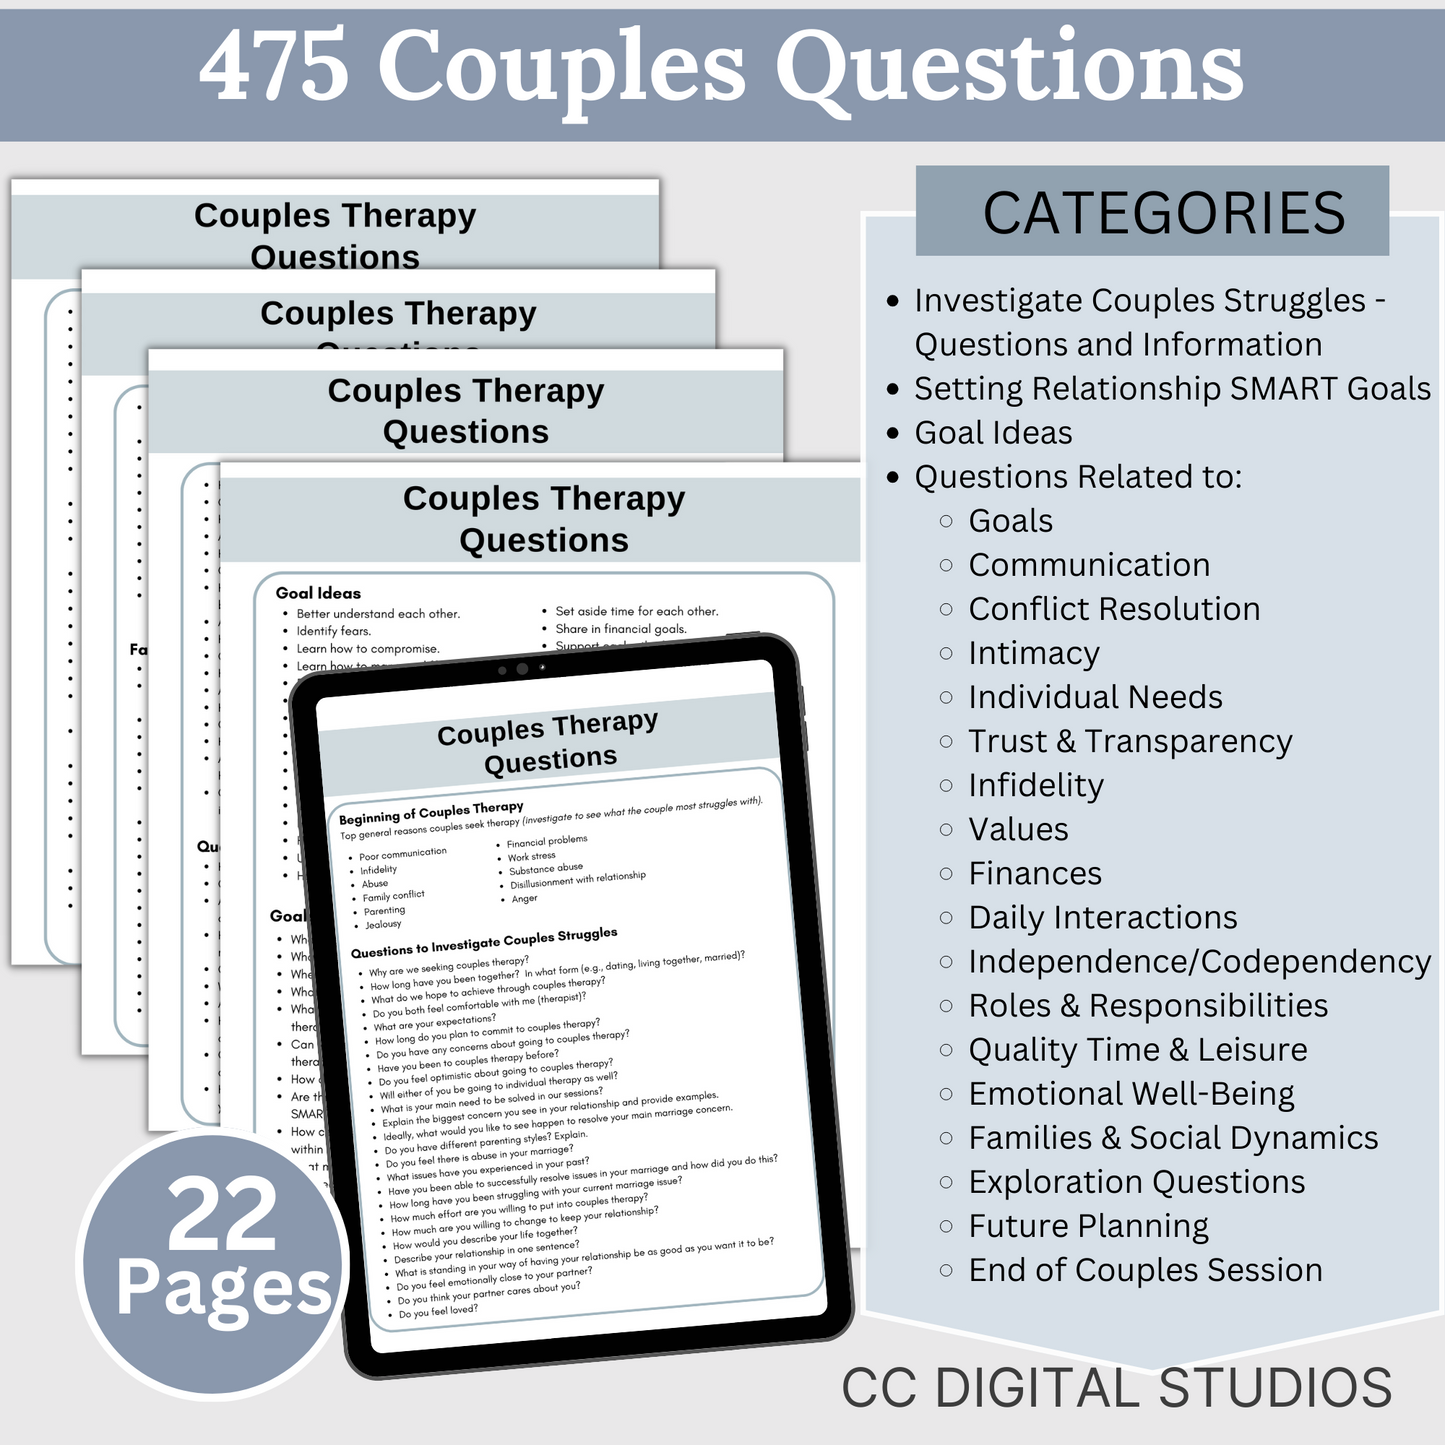 2,750 curated therapy questions across teen therapy, suicide inquiry, redirecting, motivational interviewing, couples therapy, rapport-building, and group therapy. SAVE 25% with this bundle